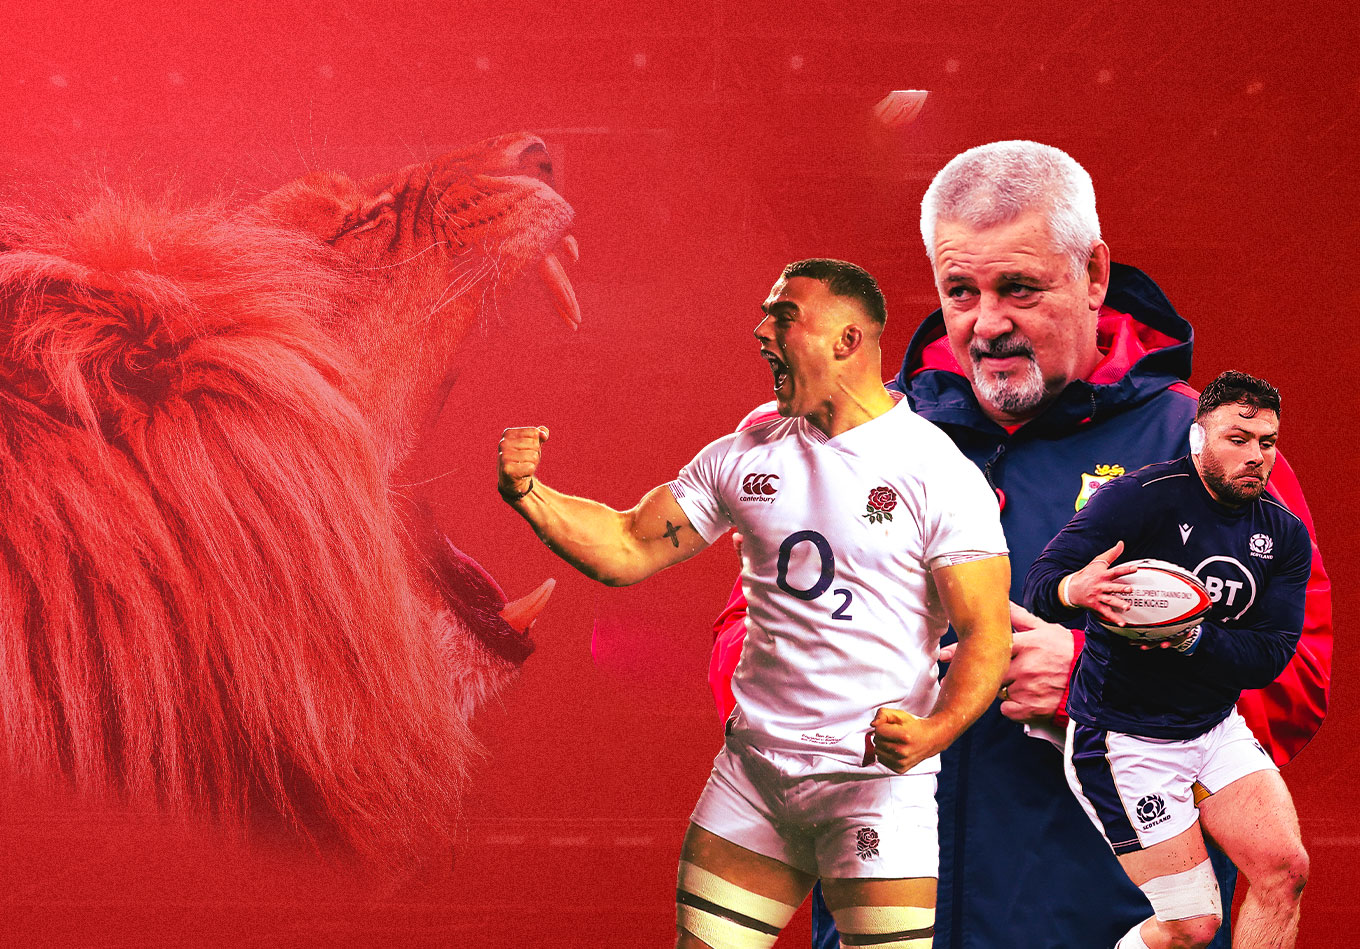 2021 Lions Squad Selection: Who Goes to South Africa?